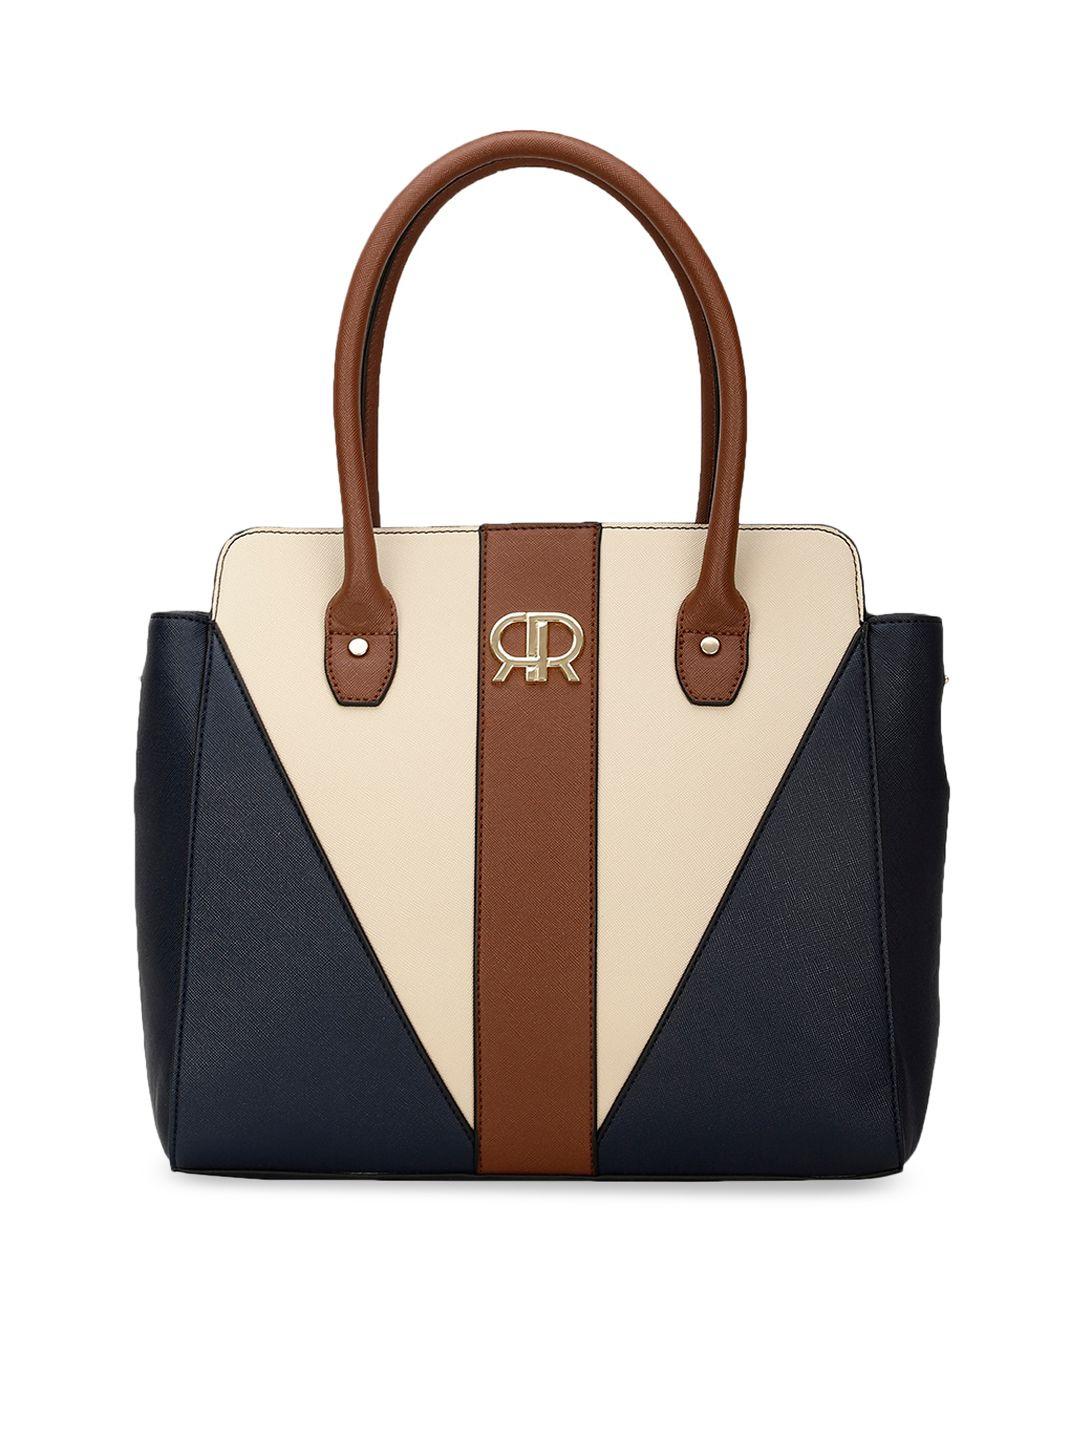 marie claire navy blue colourblocked structured shoulder bag